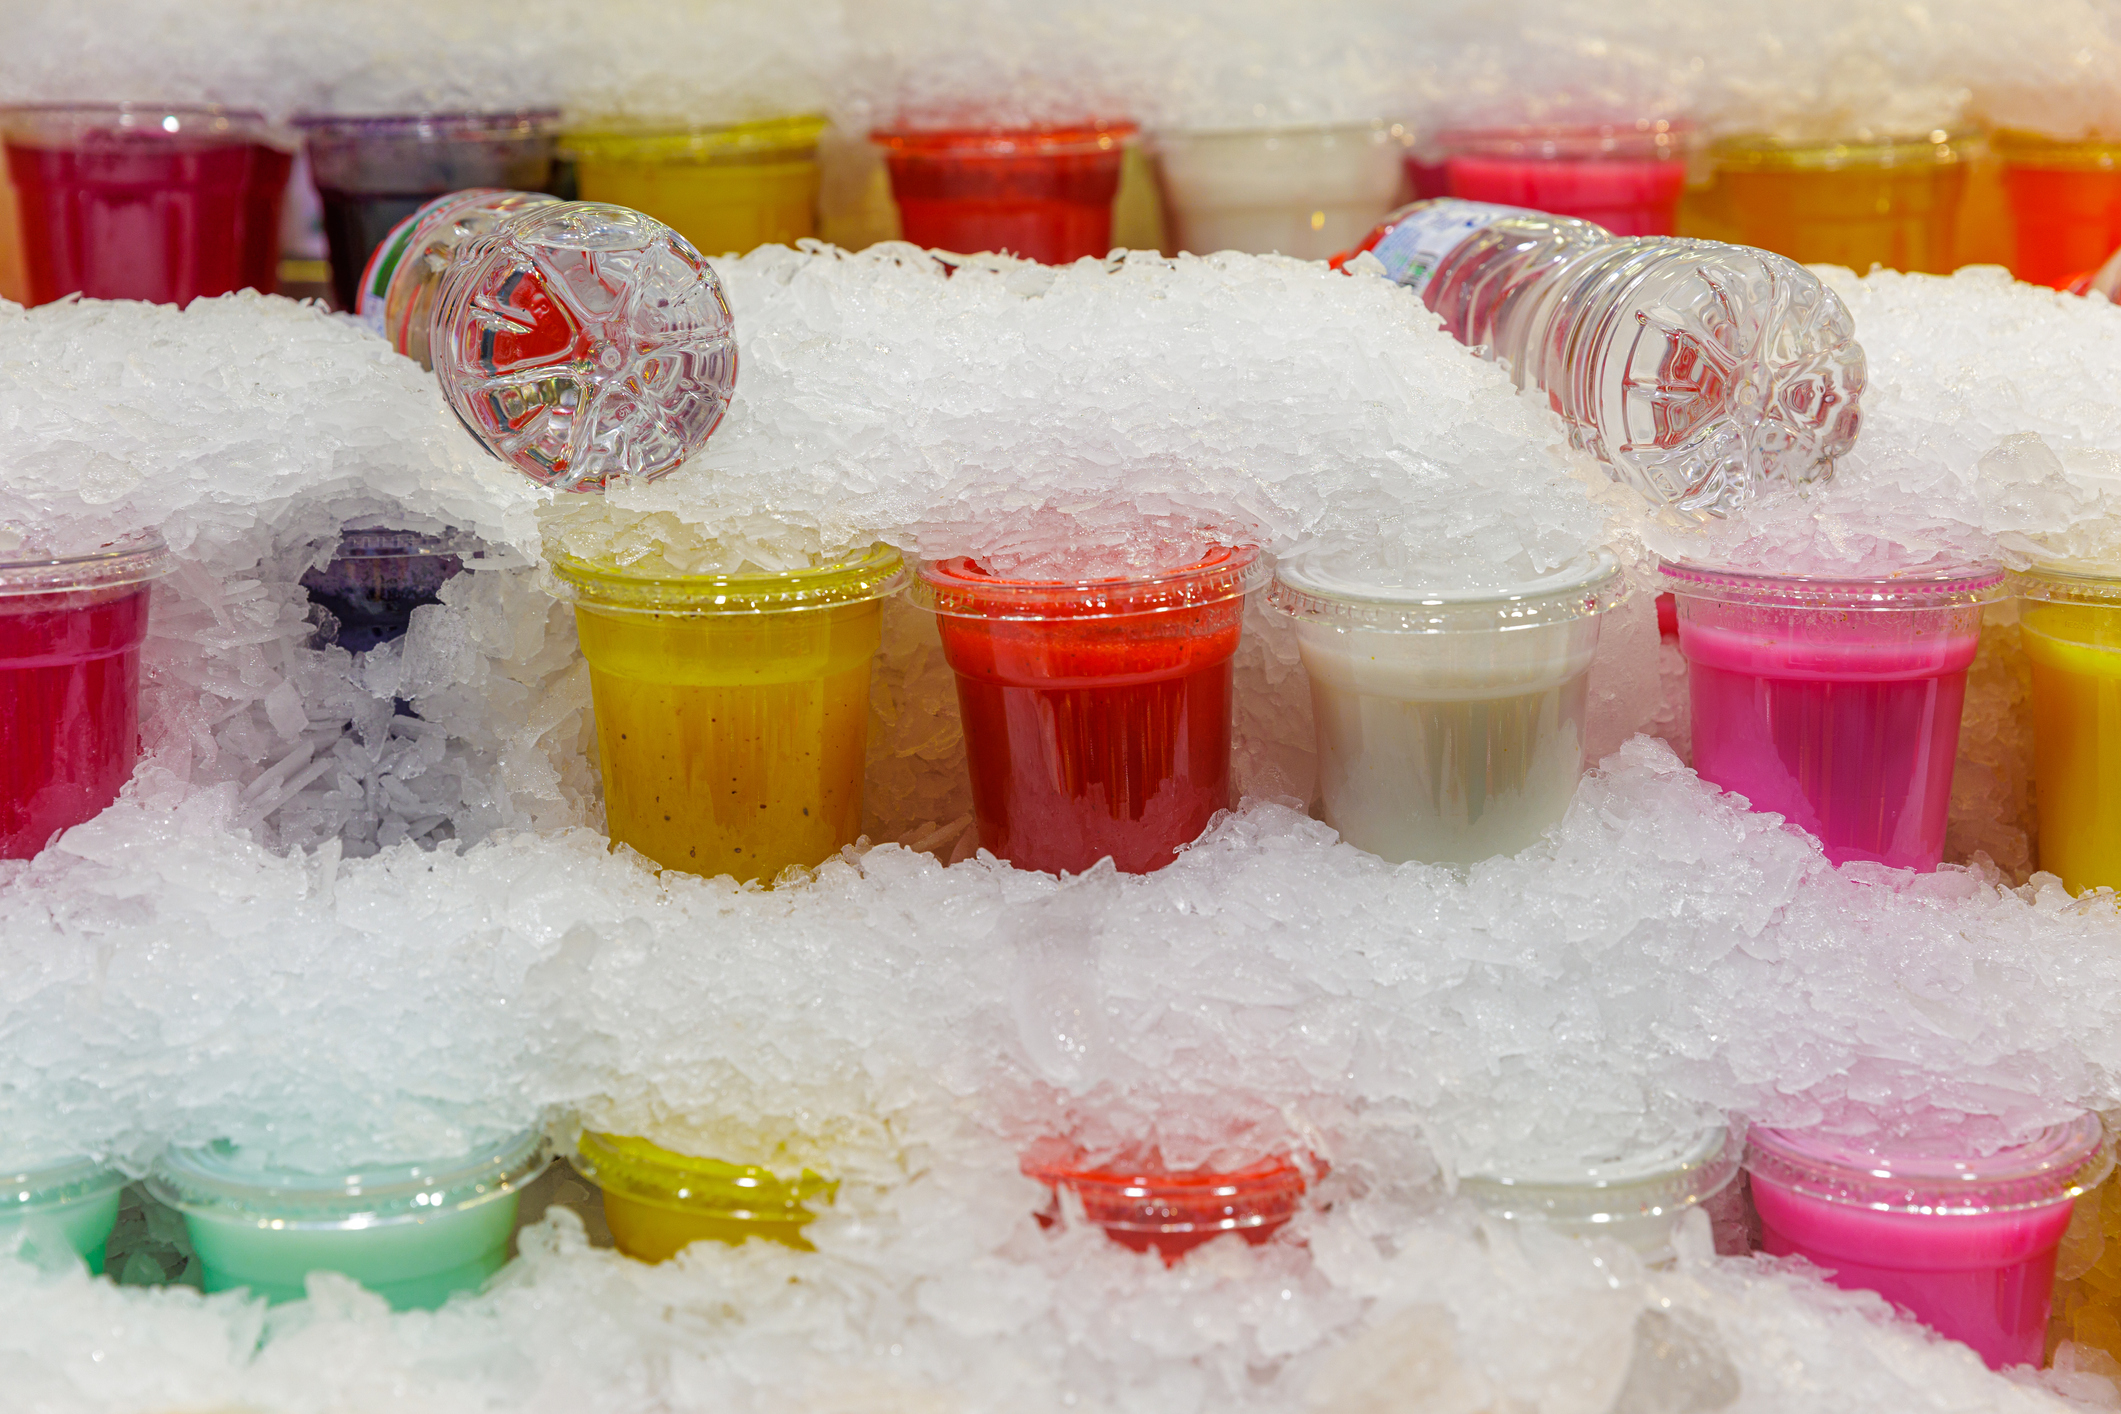 Rows of colorful frozen drinks on ice